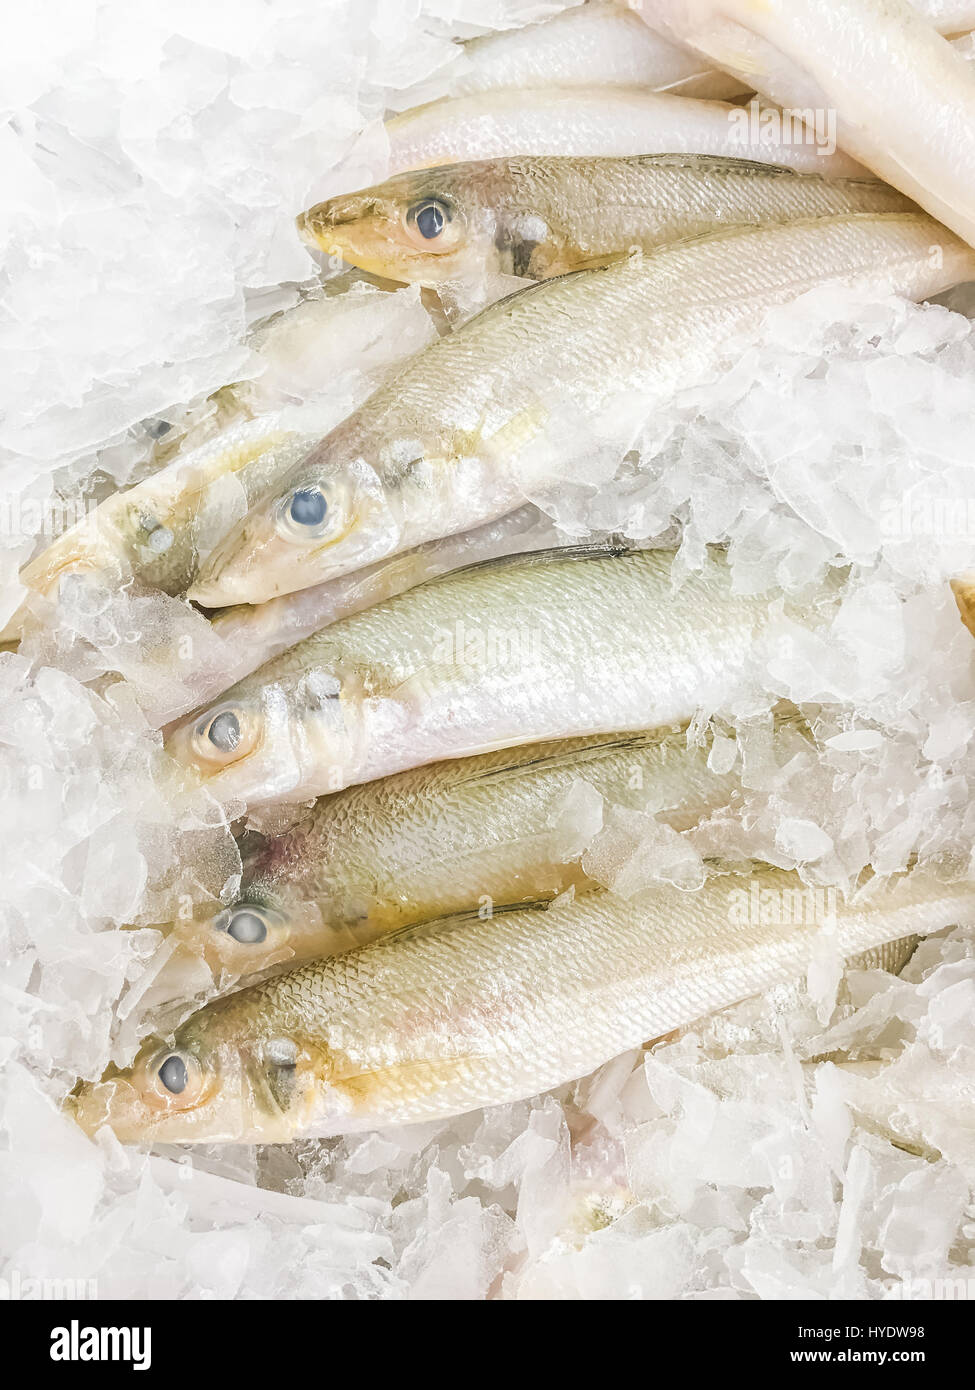 Silver sillago fish fresh in ice sell on market. Stock Photo